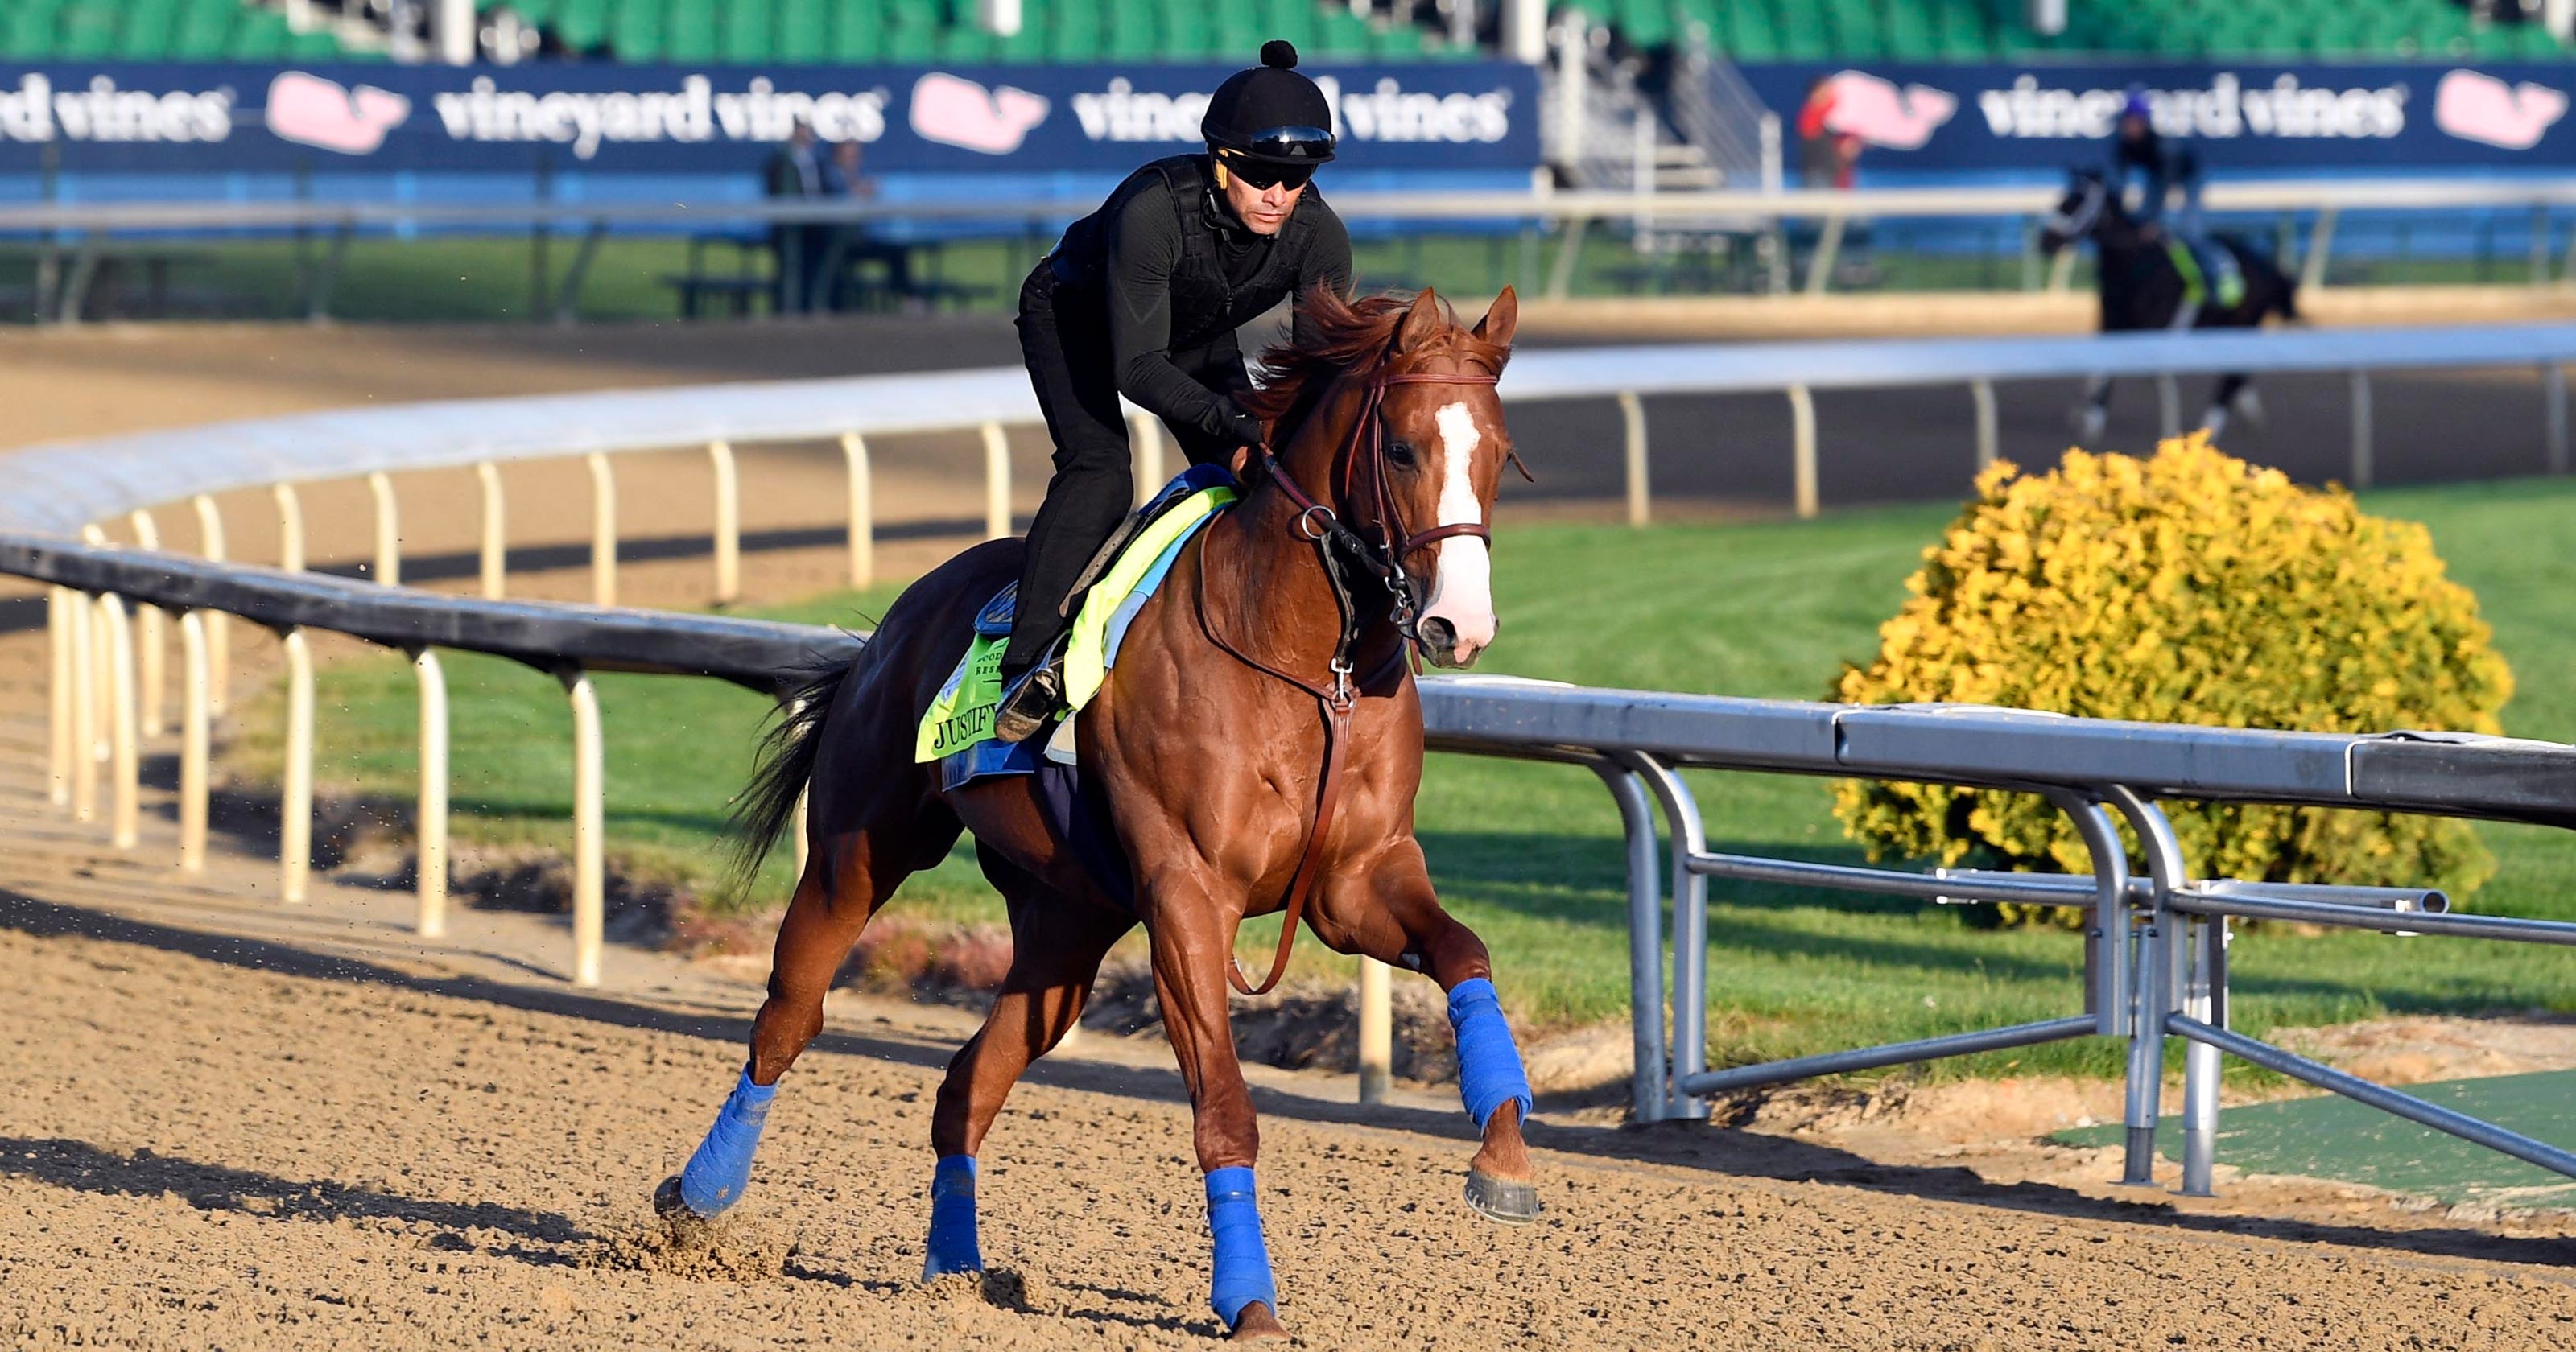 Kentucky Derby Here are 20 horses that make up field